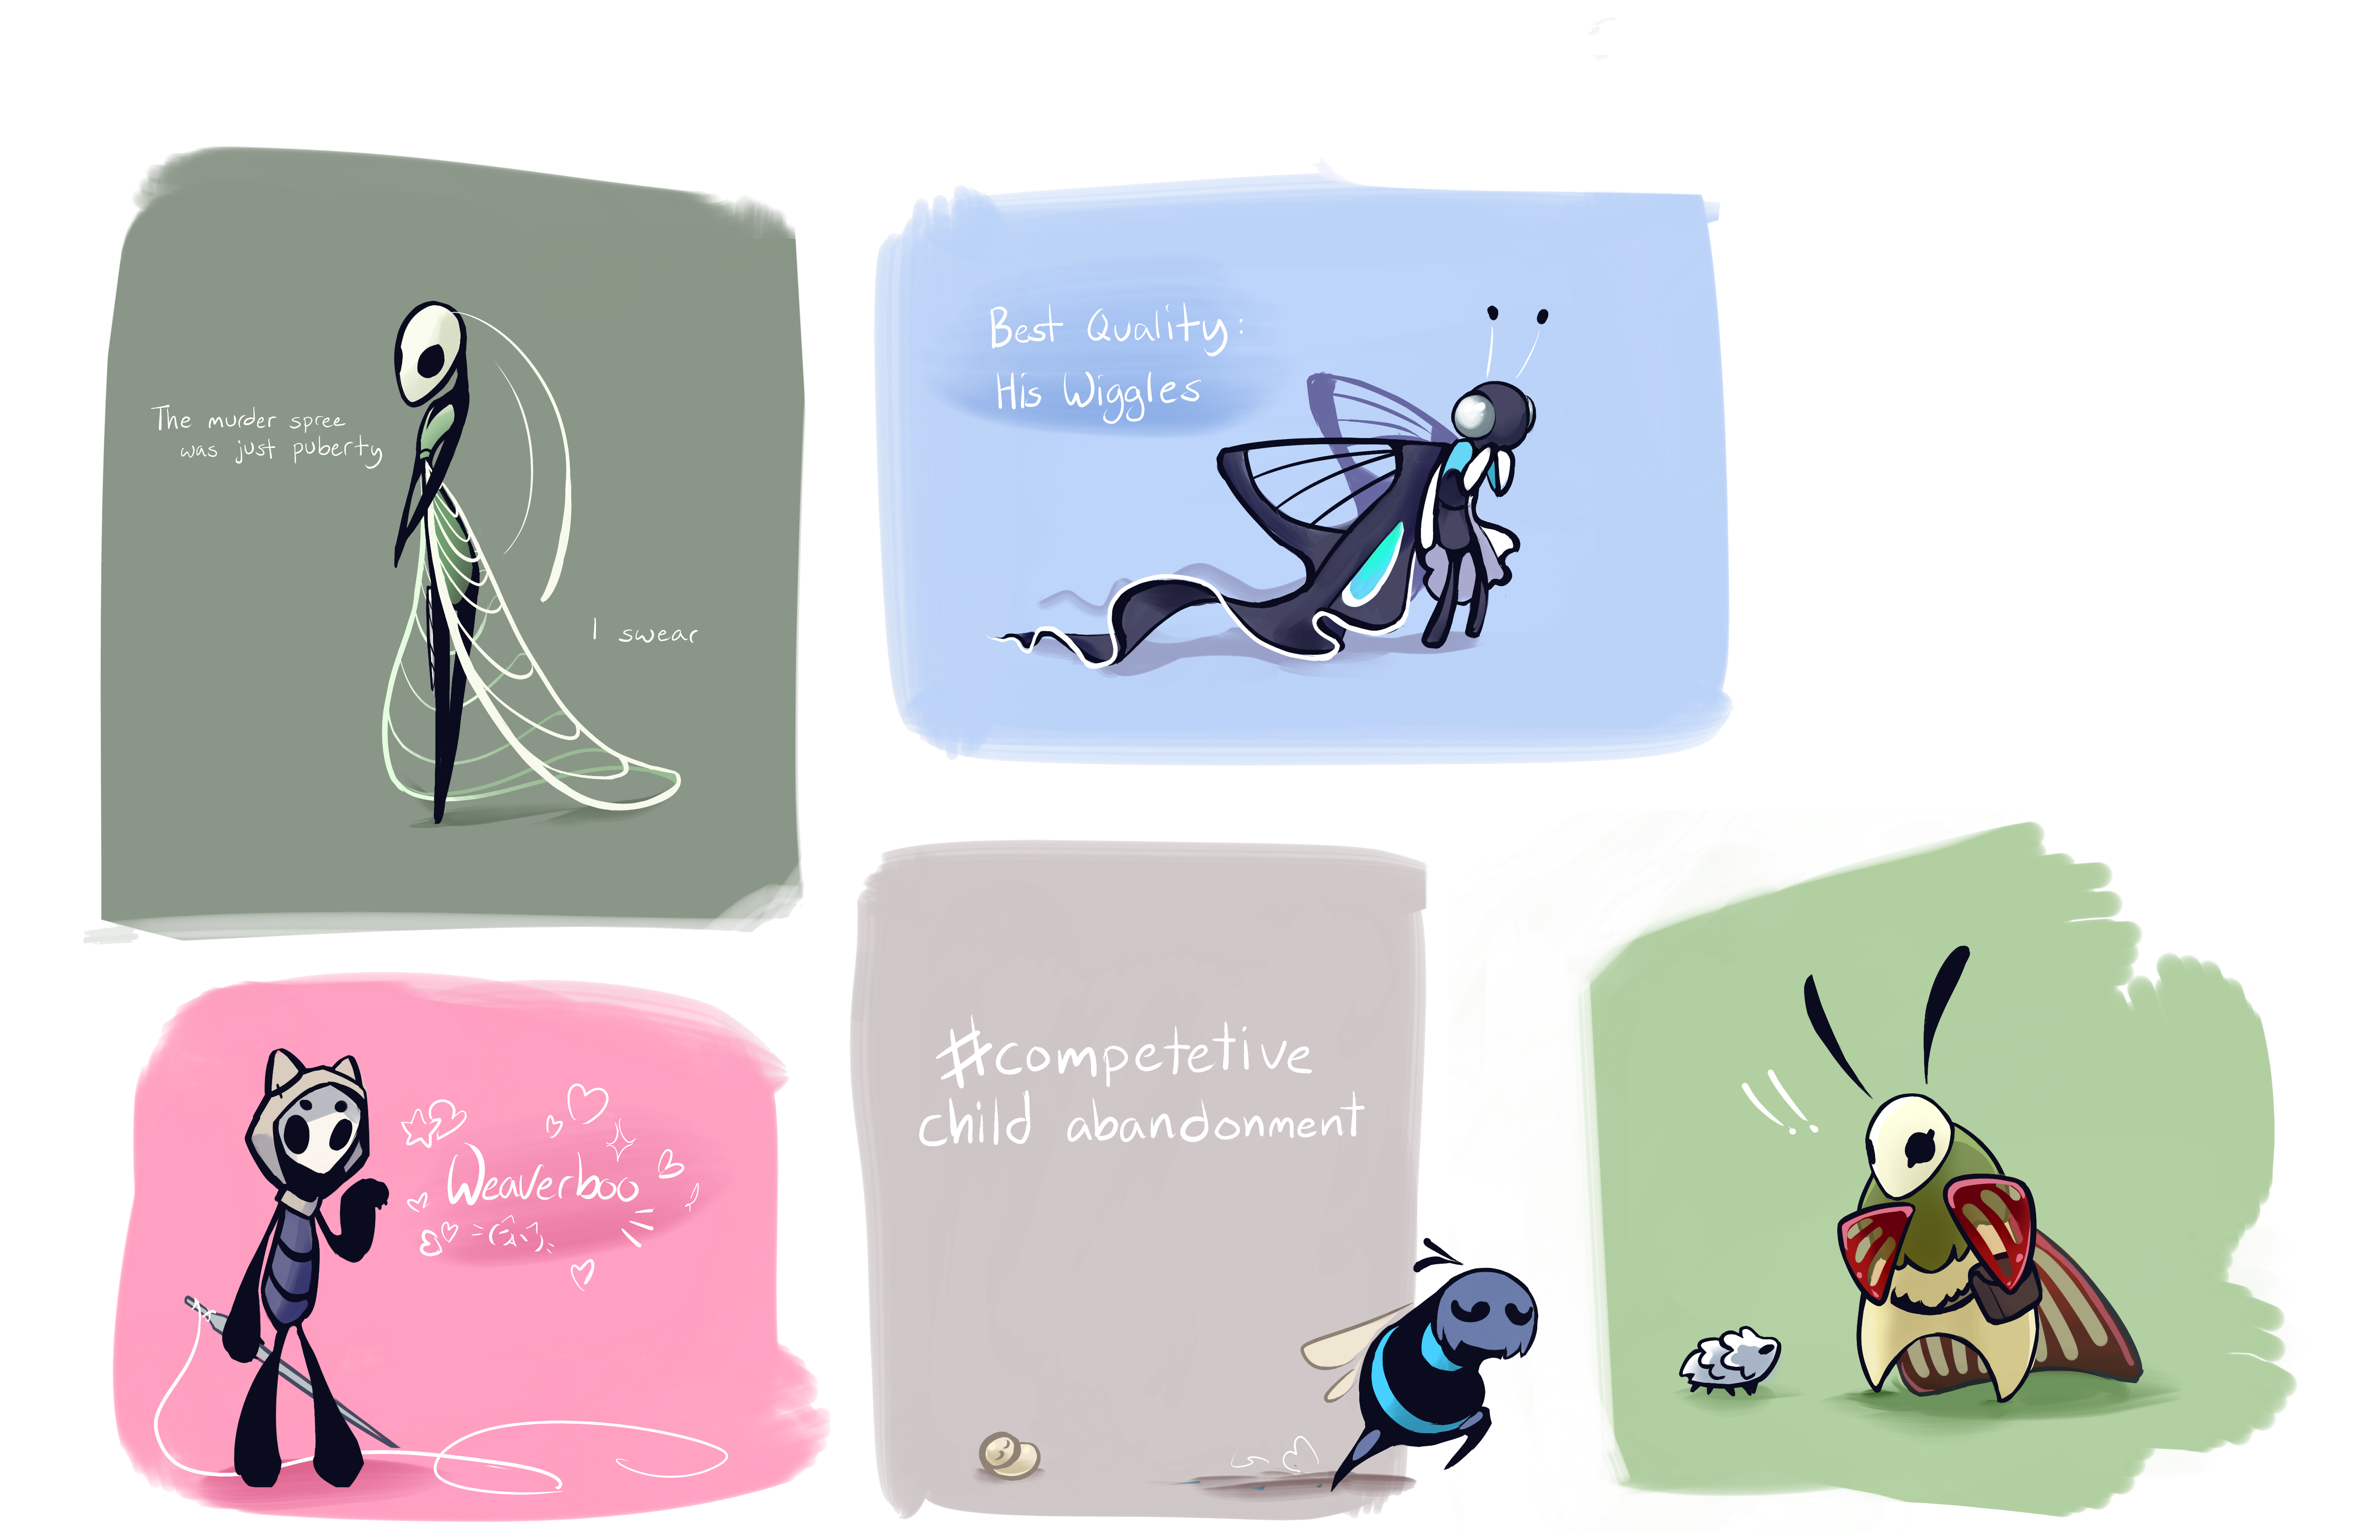 500-hollow-knight-style-16323300617482.png